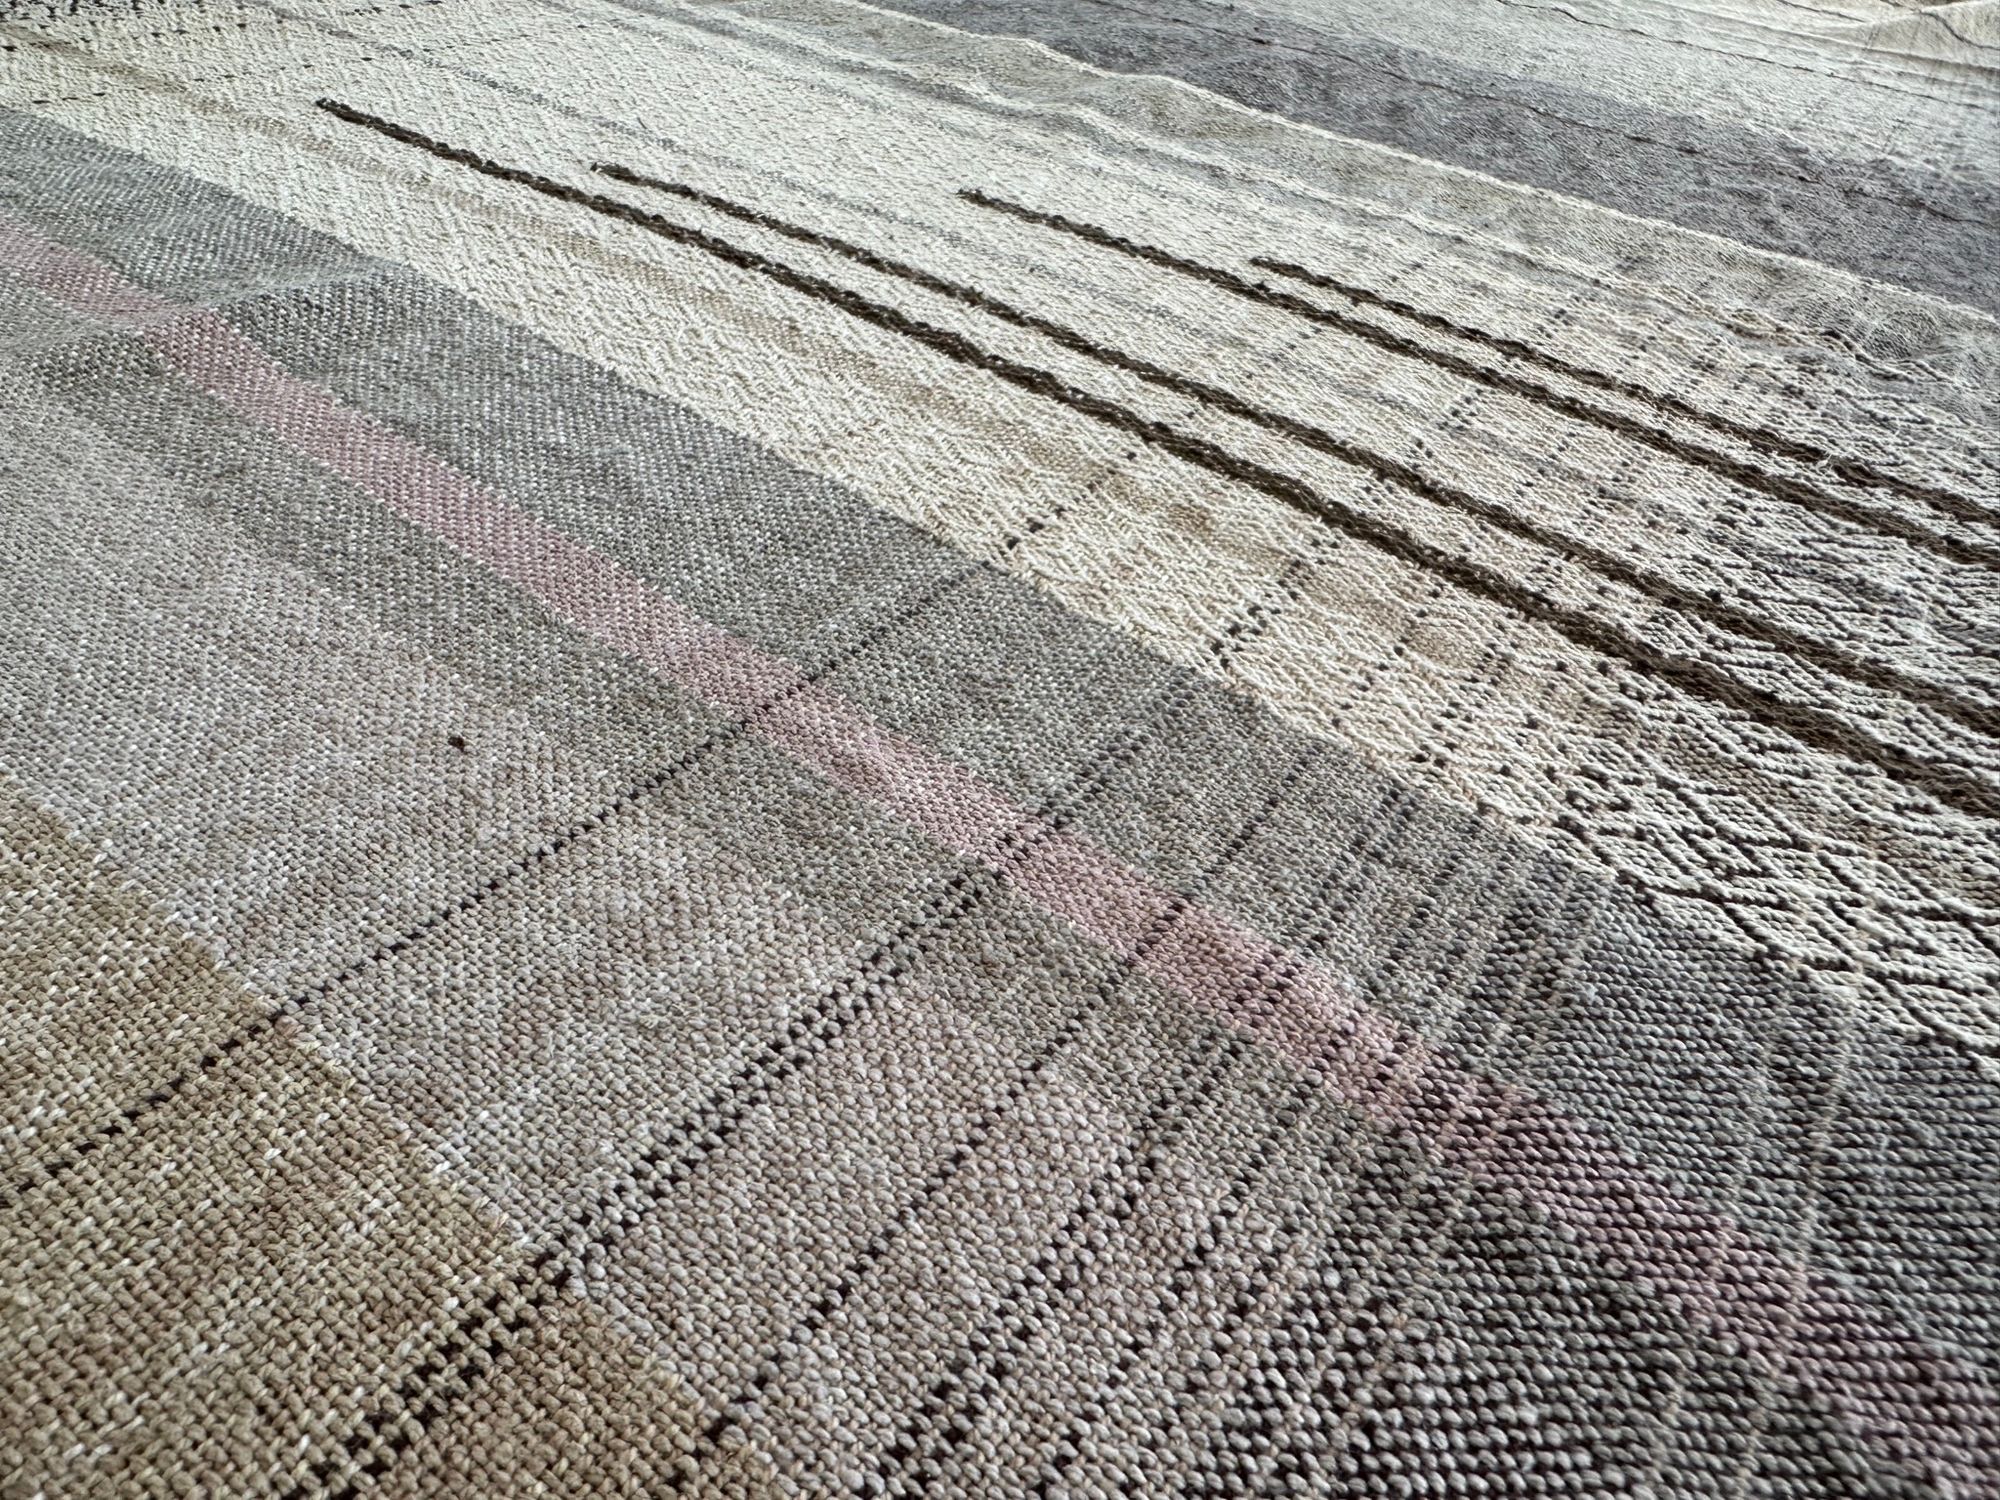 Details of a handwoven naturally dyed raw silken organic cotton linen shawl with diamond pattern and stripes of gradations of grey, brown, tan and white.